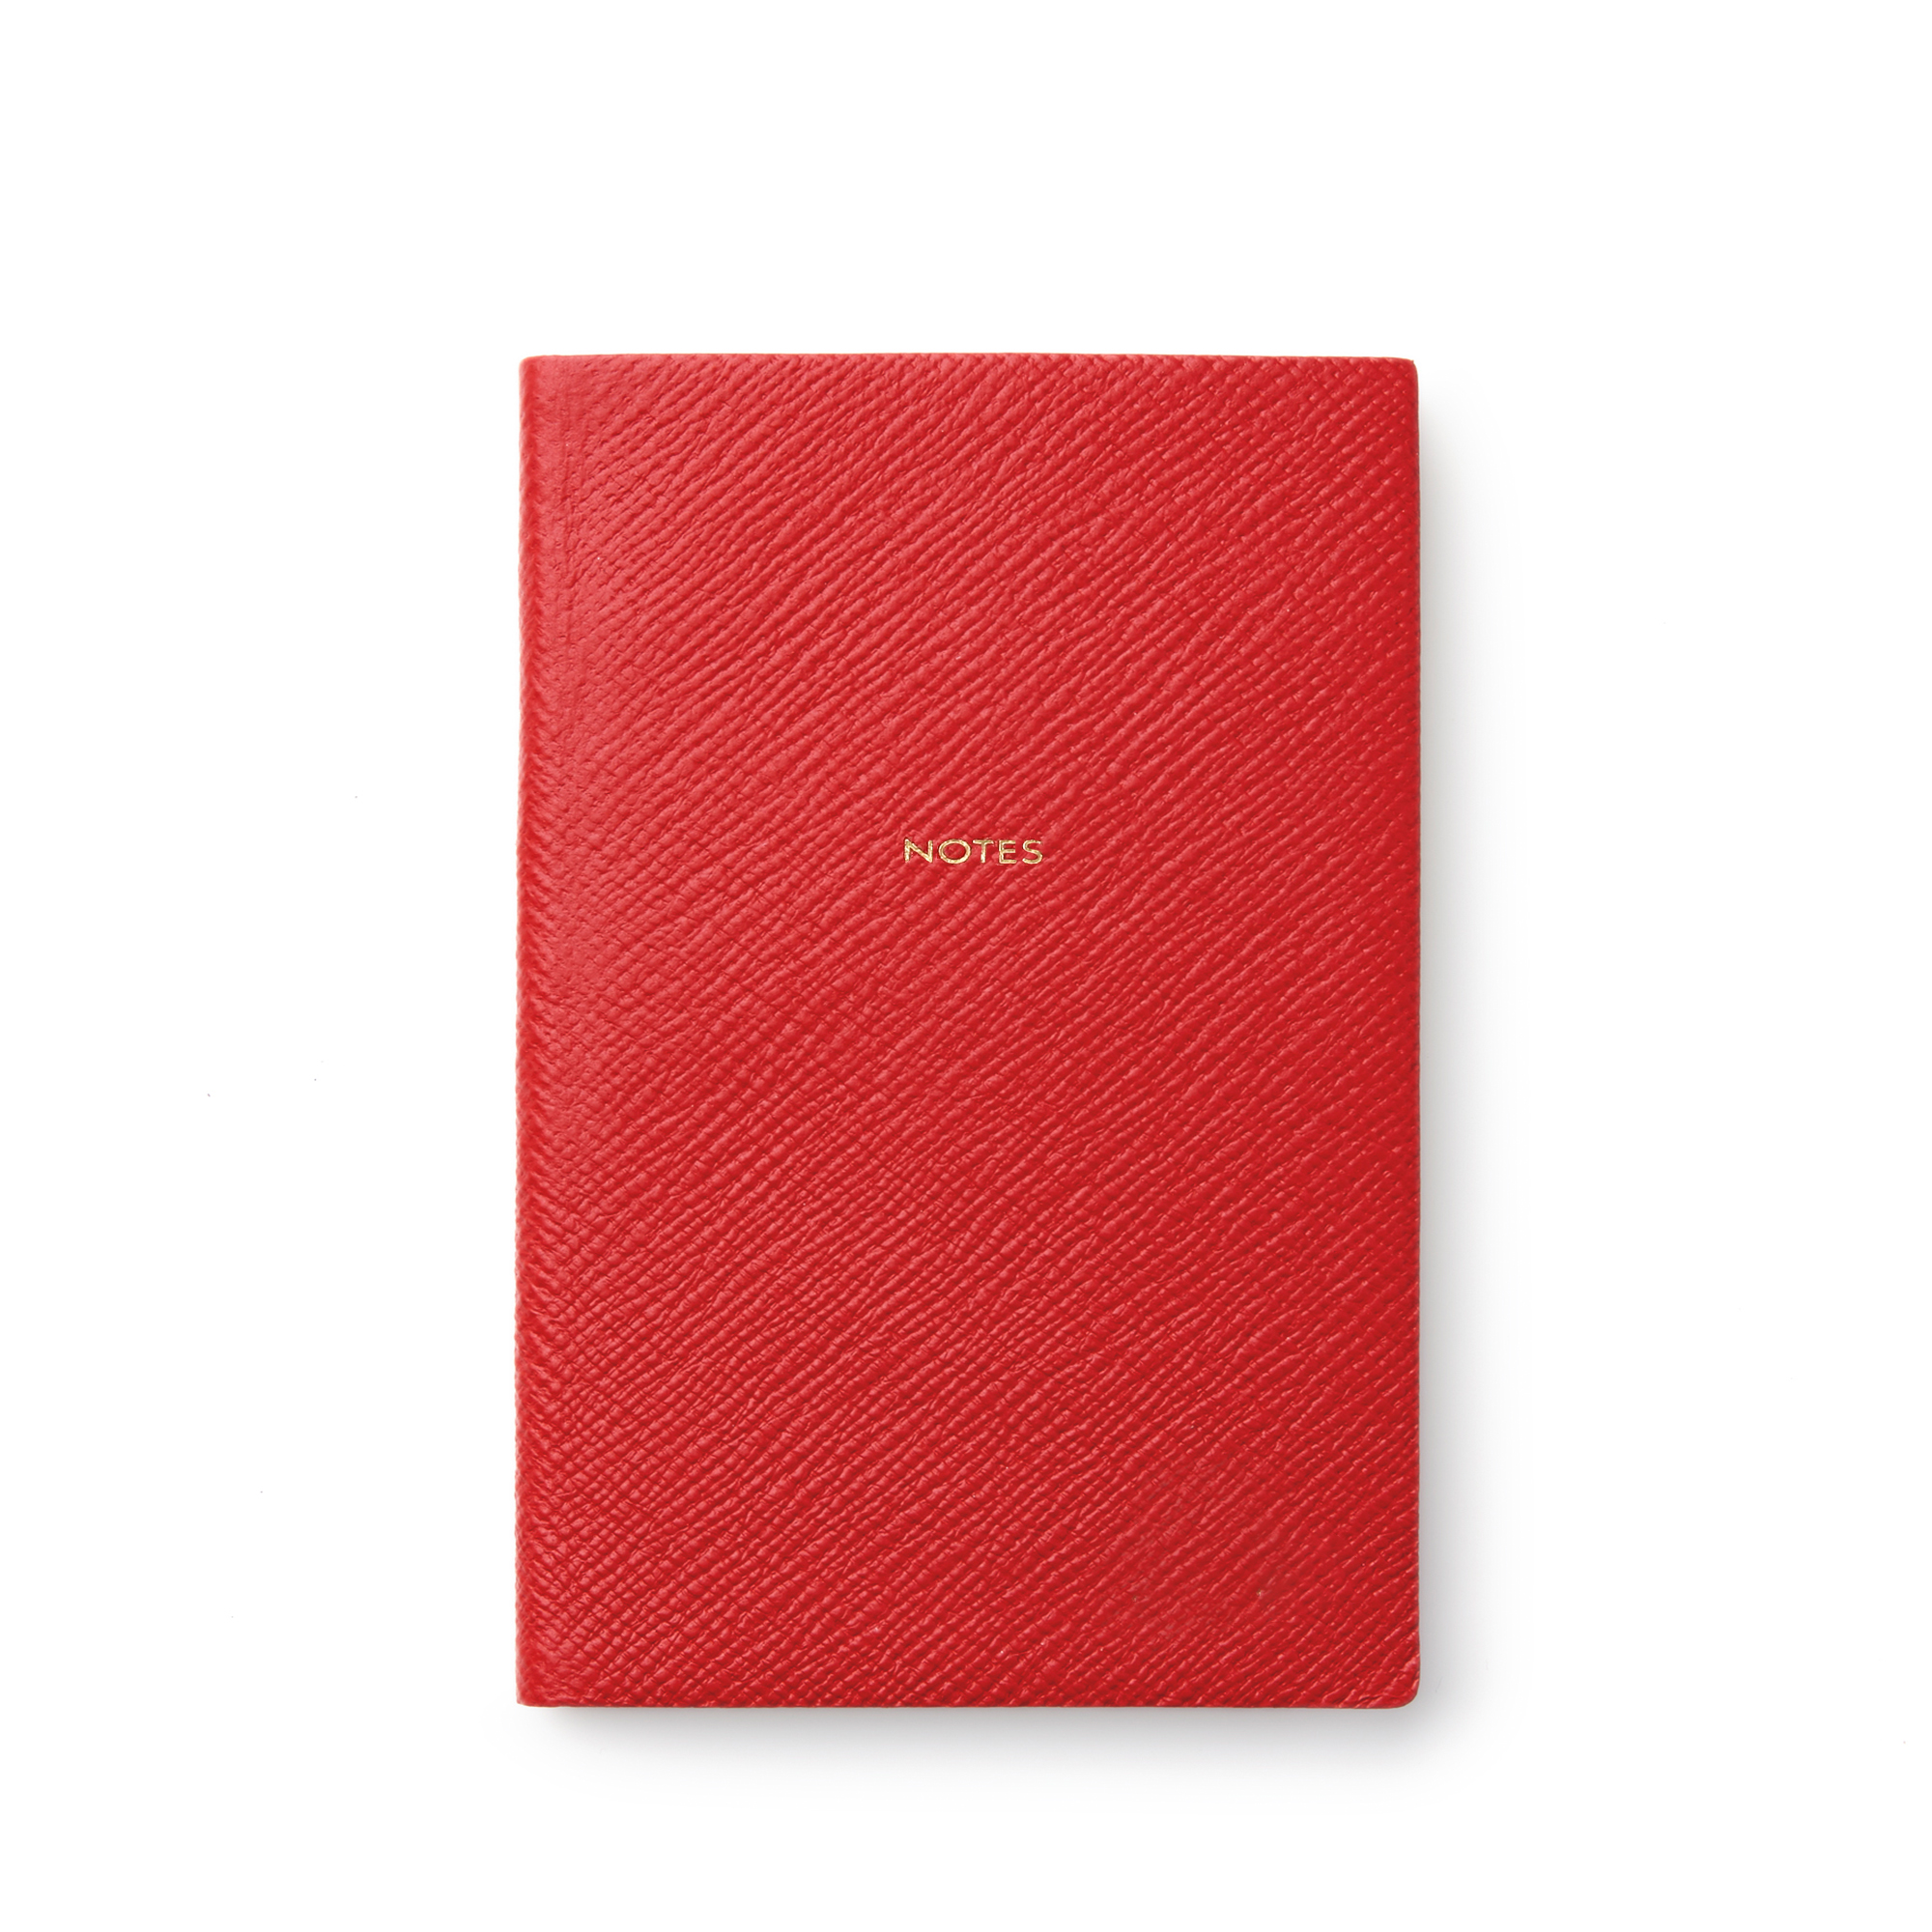 SMYTHSON Chelsea textured-leather notebook